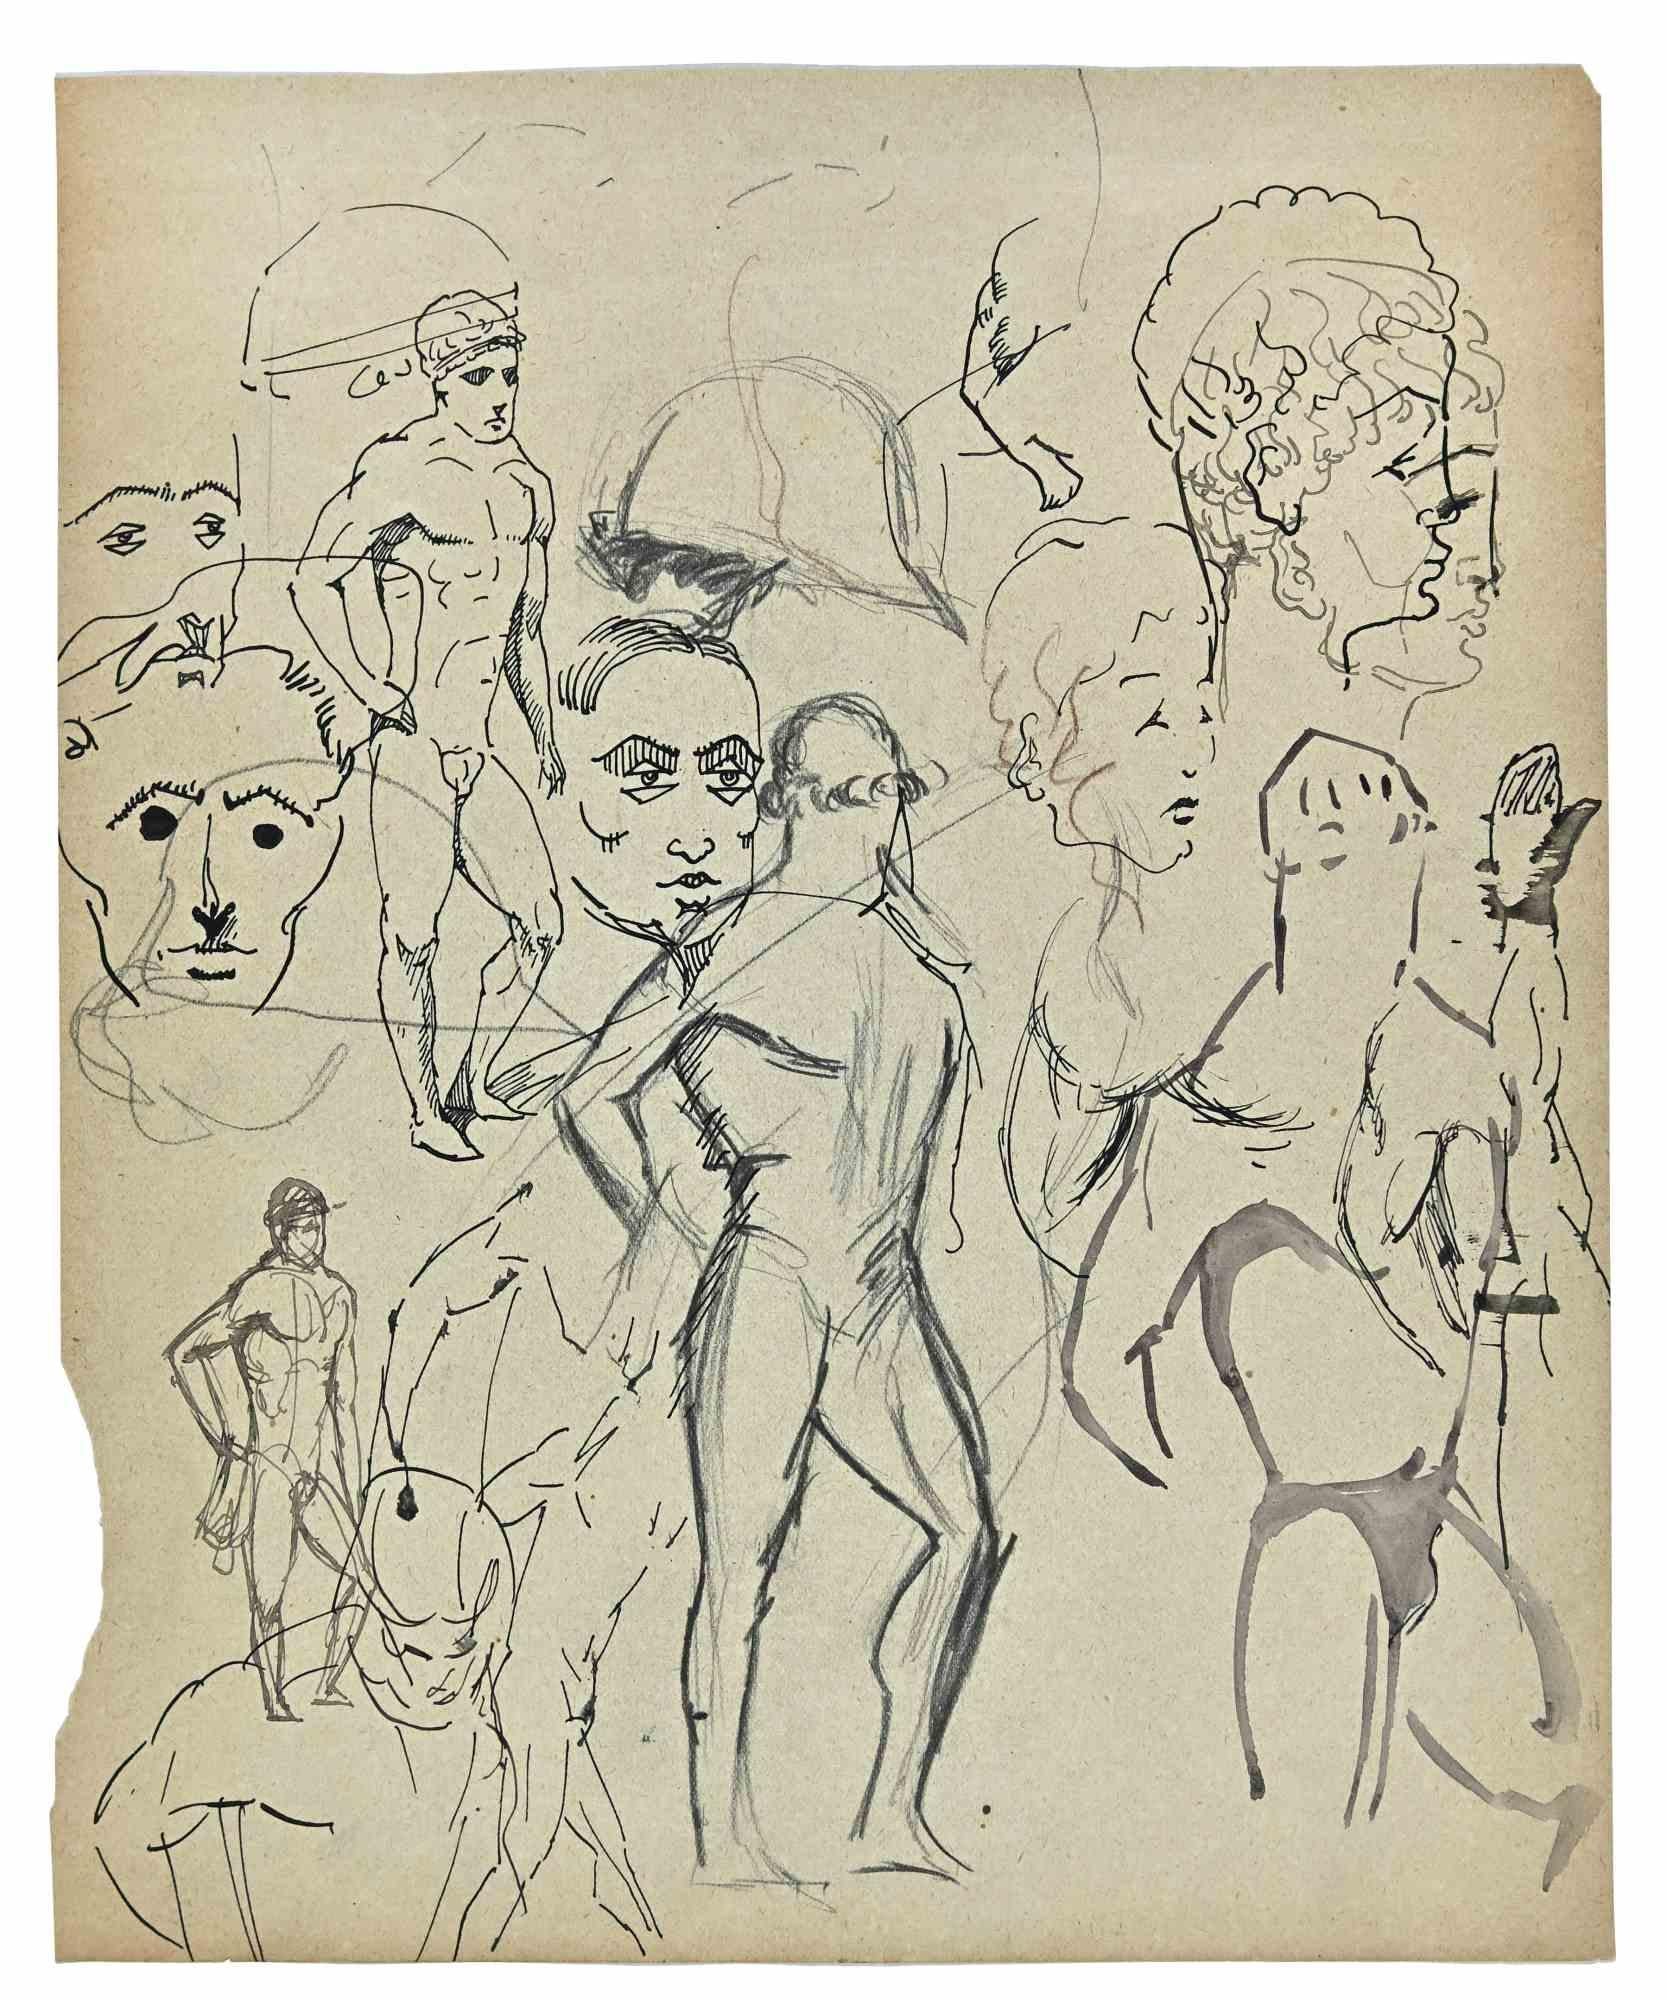 The Sketches of Figures - Original Drawing by Norbert Meyre - Mid-20th Century